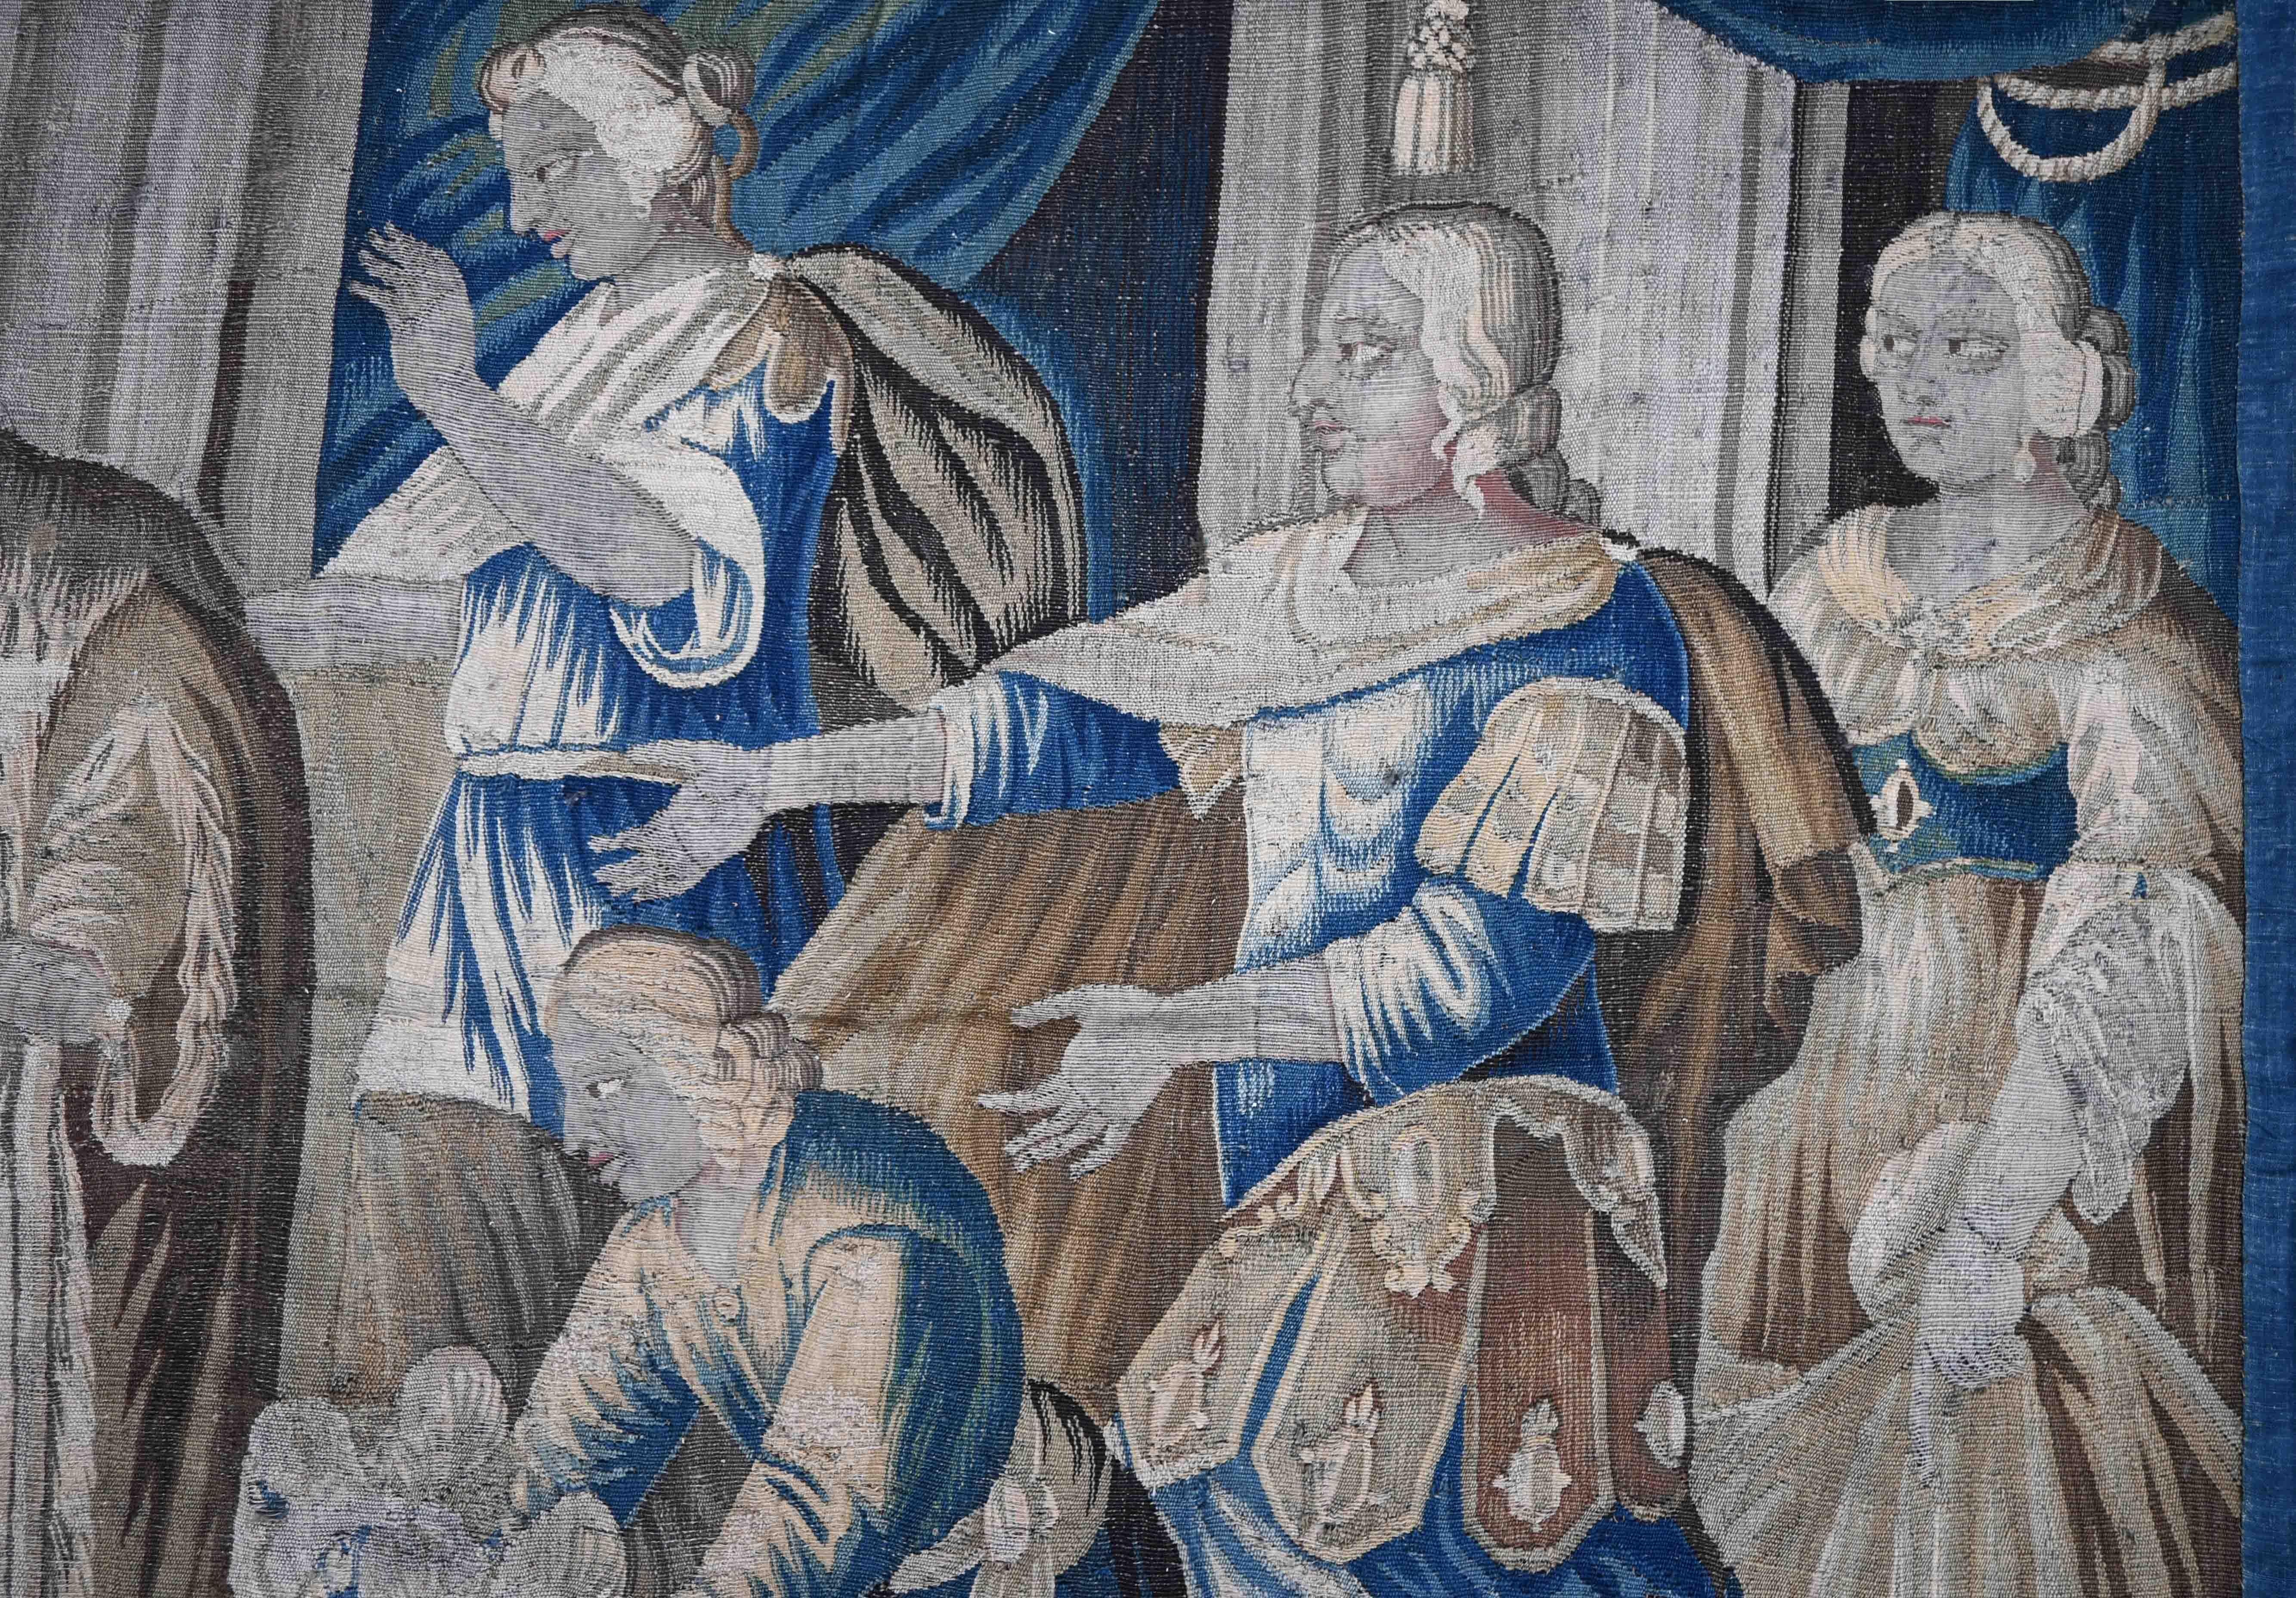 Hand-Woven The Return of the Prodigal Son 17th Century Biblical Aubusson Tapestry - N° 1390 For Sale